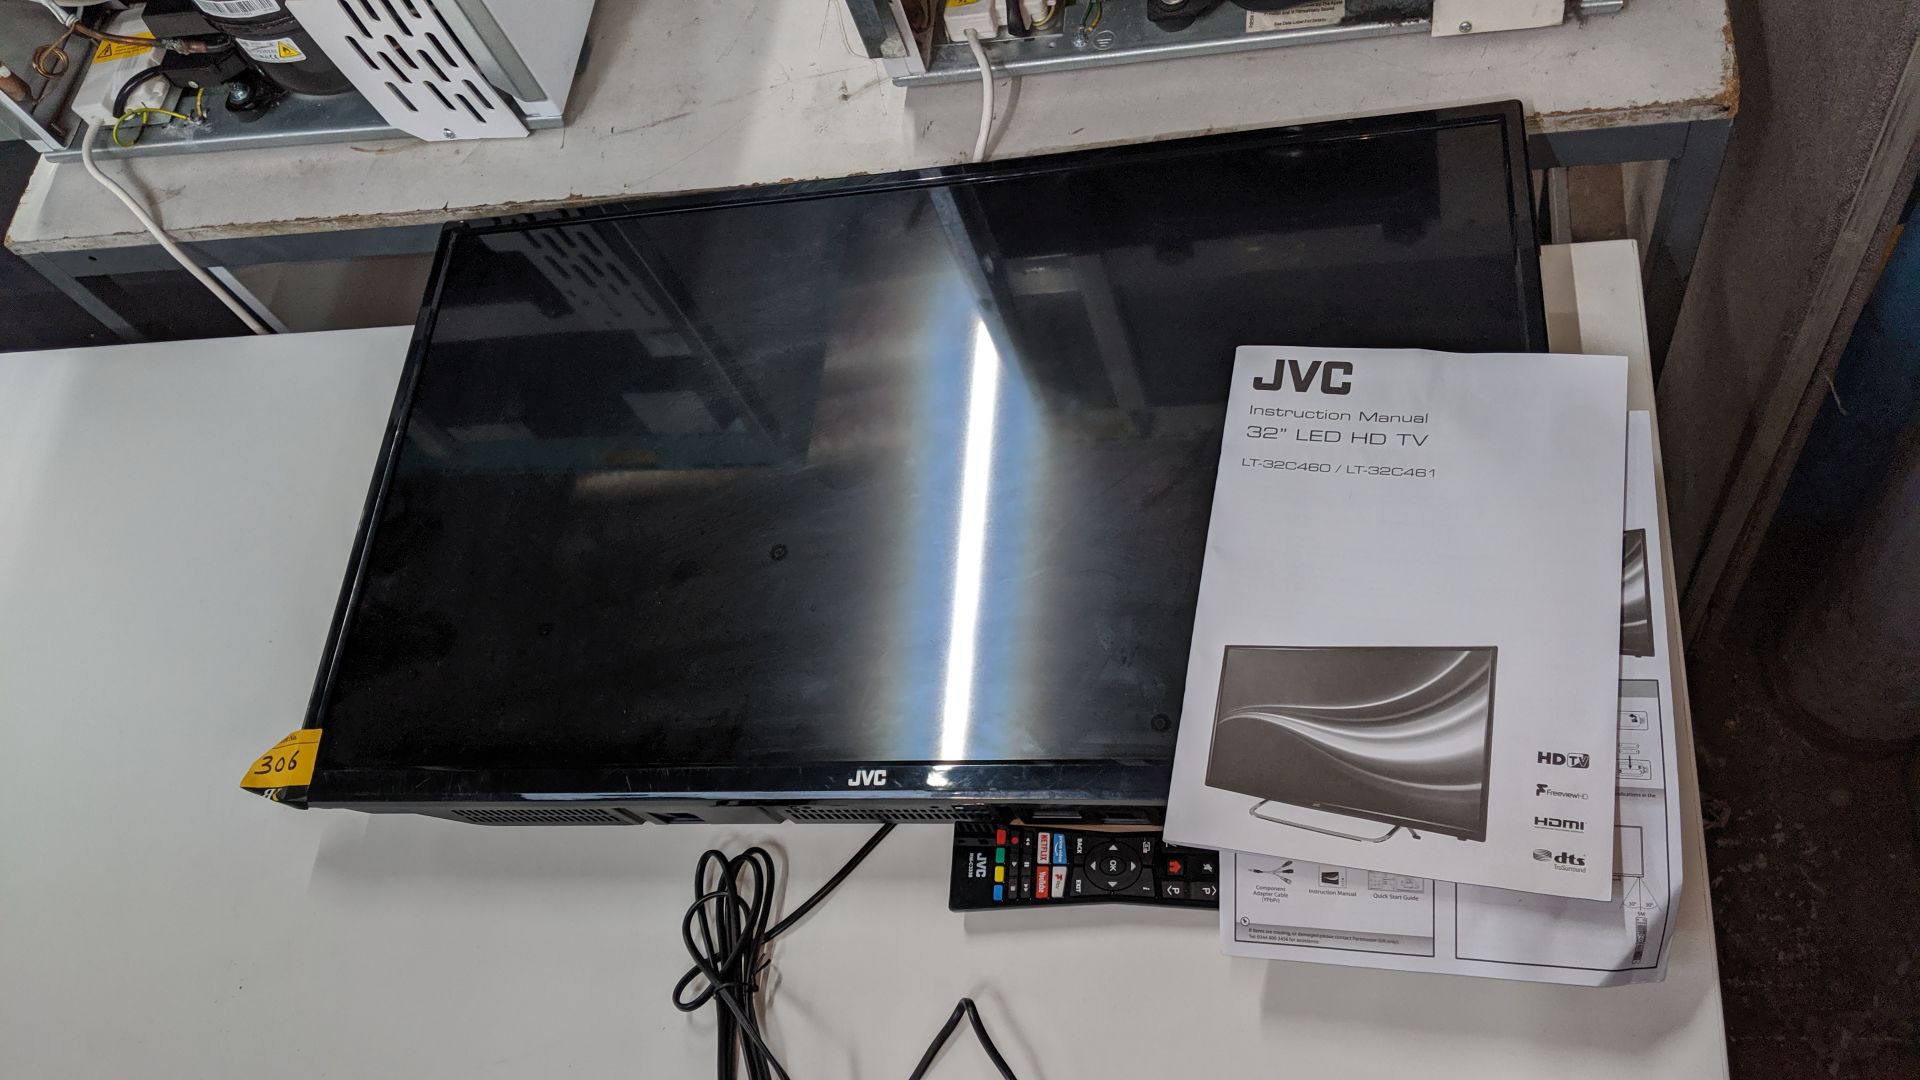 JVC 32" LED TV including remote control - understood to be broken. This is one of a large number - Image 6 of 6